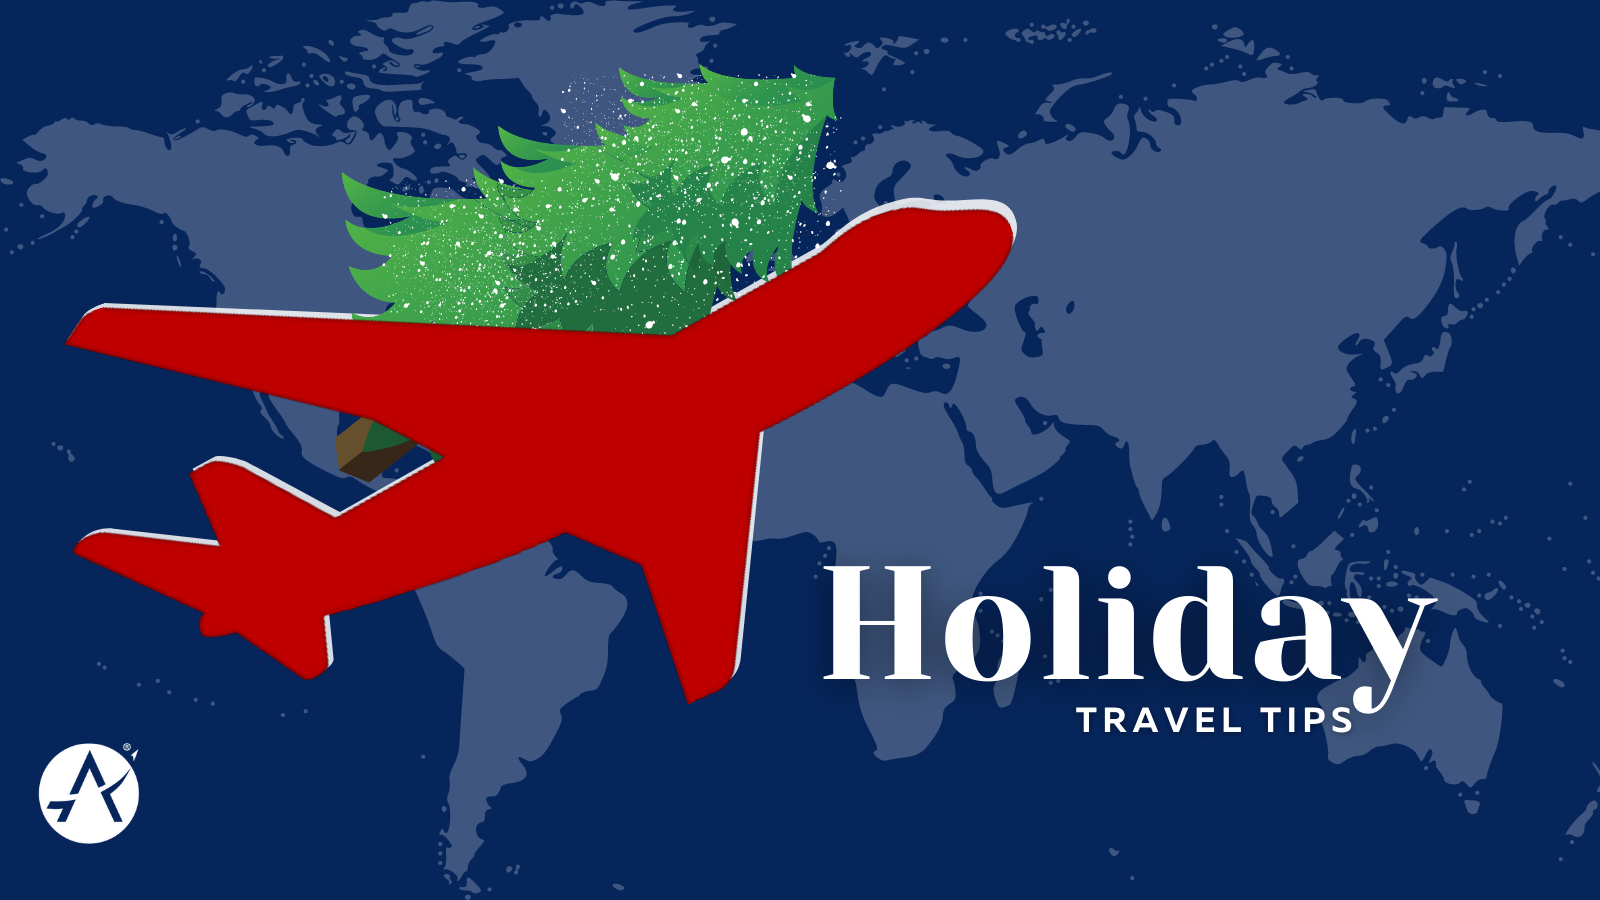 A red airplane with a Christmas tree on it flies above the words "Holiday Travel Tips"